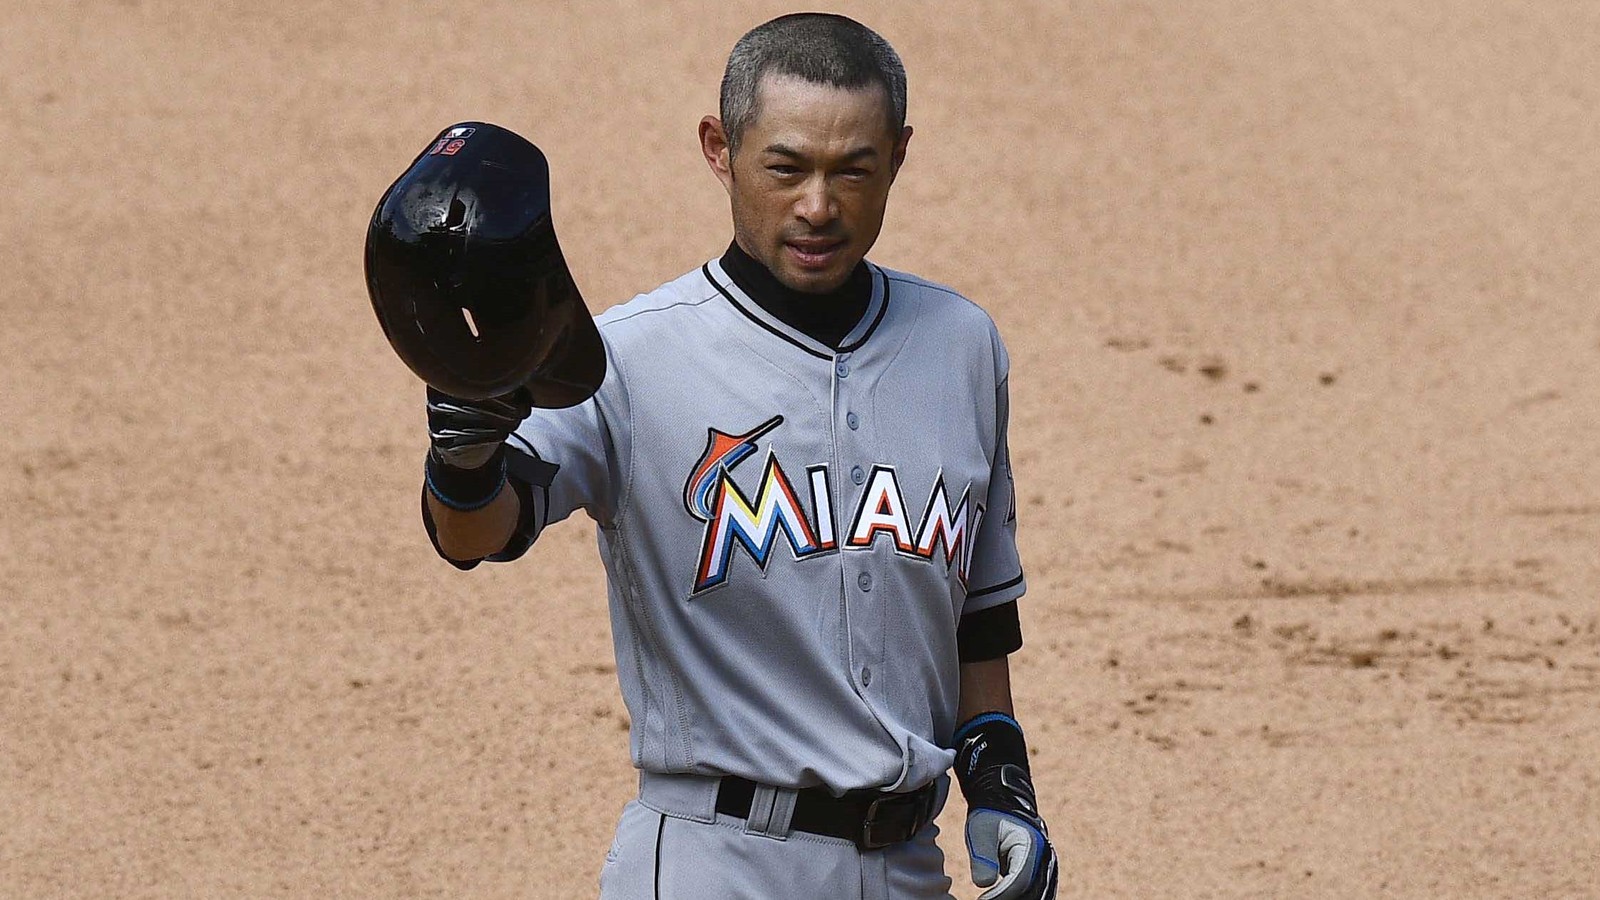 Sports world says congrats to Ichiro after 3,000th MLB hit